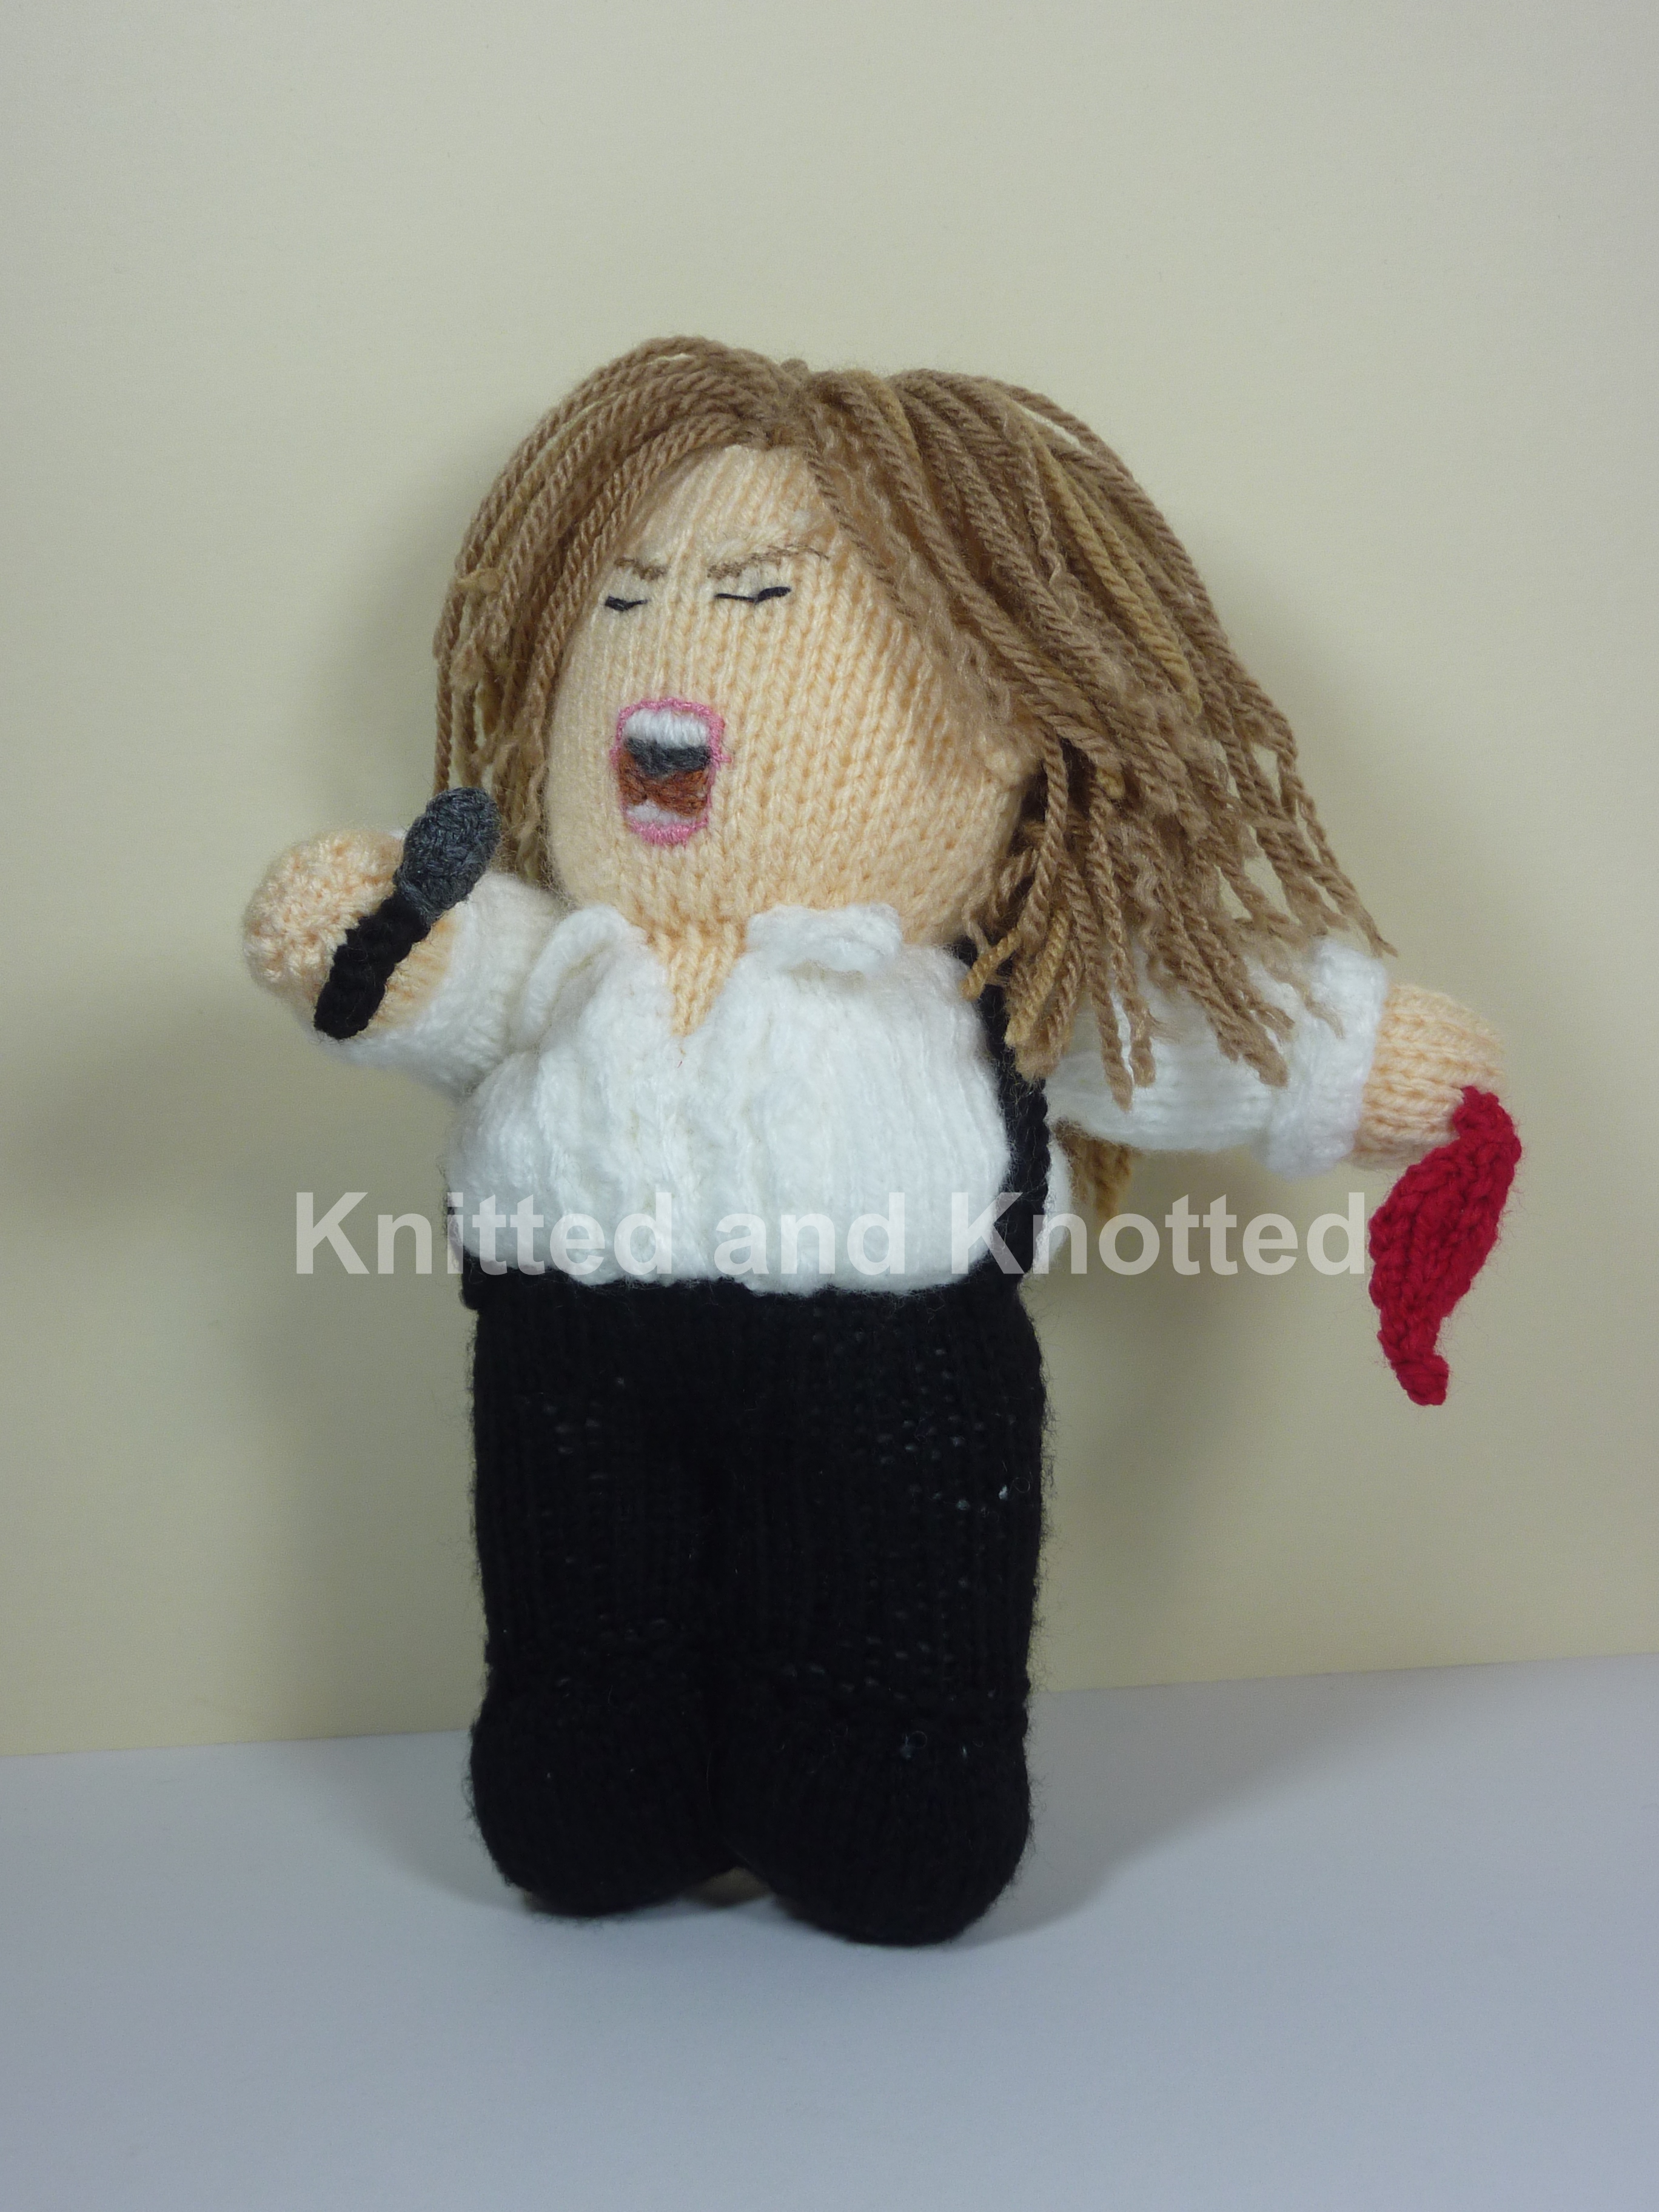 www.knittedandknotted.com